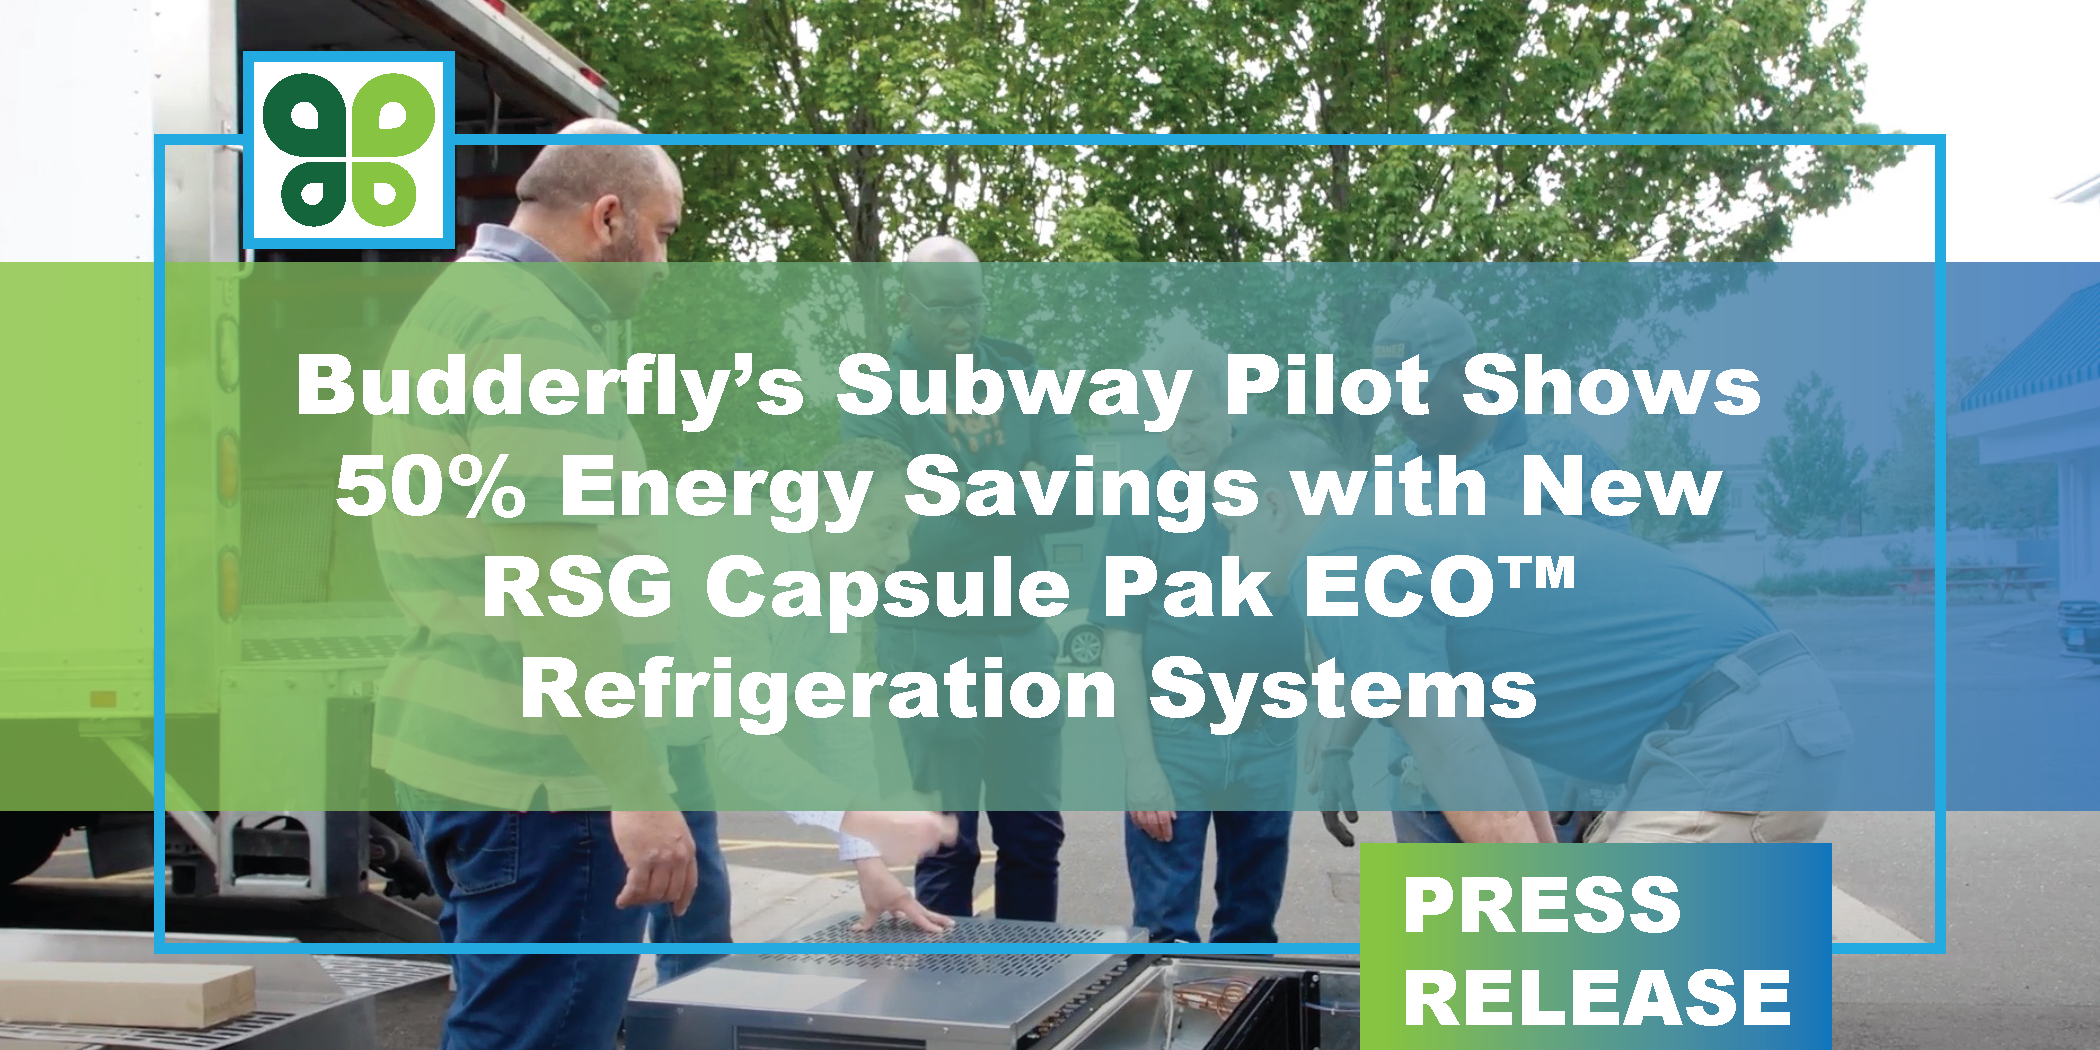 Budderfly’s Subway Pilot Shows 50% Energy Savings with New RSG Capsule Pak ECO™ Refrigeration Systems